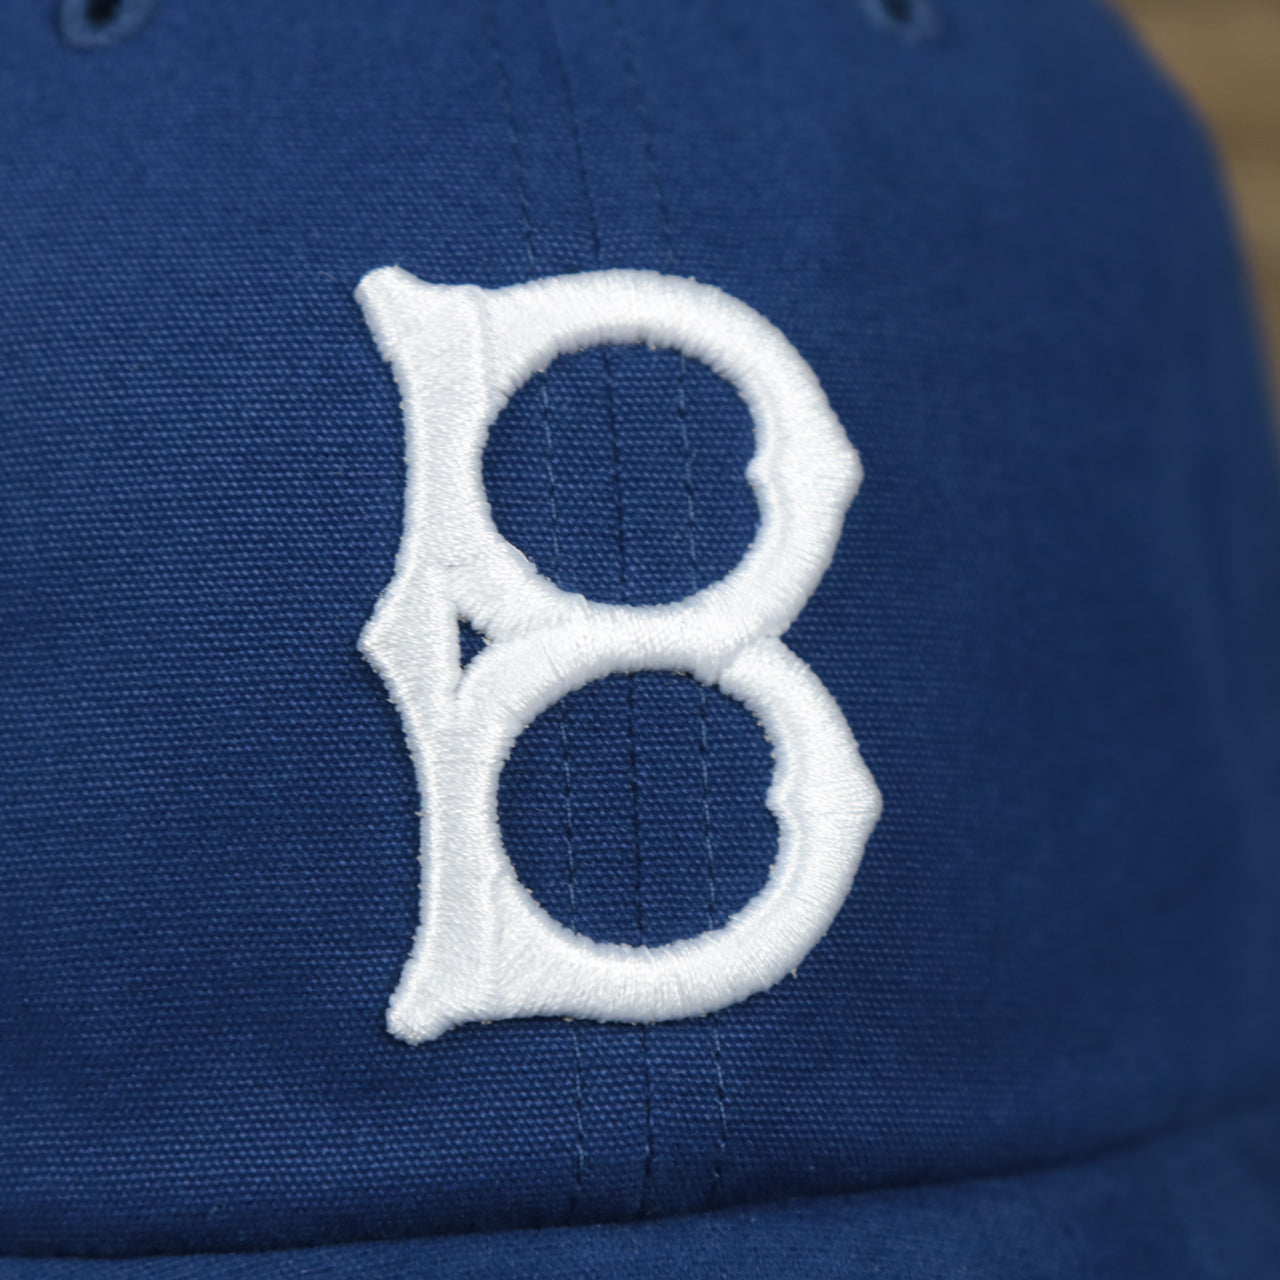 The Brooklyn Dodgers Logo on the Cooperstown Brooklyn Dodgers Cooperstown Collection Side Patch Leather Brown Undervisor Dad Hat | Vintage Royal Blue Dad Hat